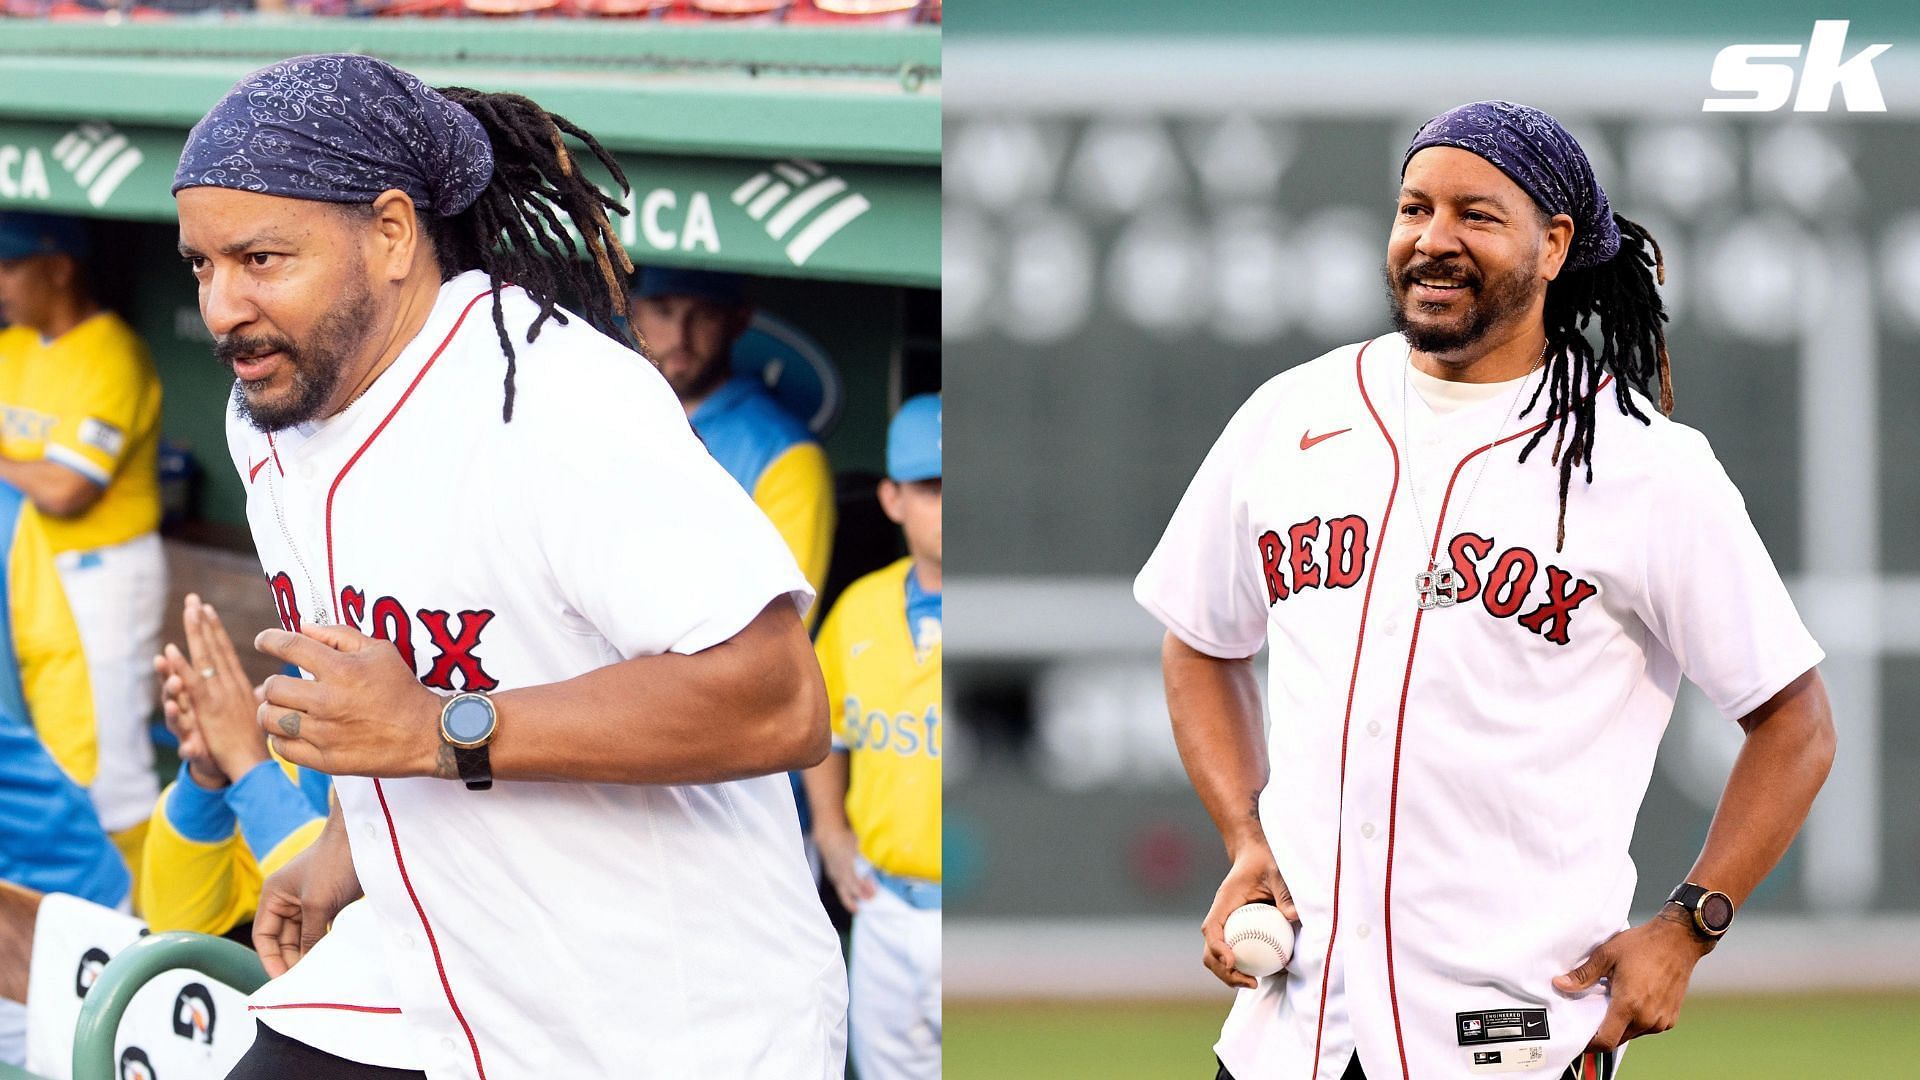 Boston Red Sox legend Manny Ramirez seen crushing home runs at 51-years-old